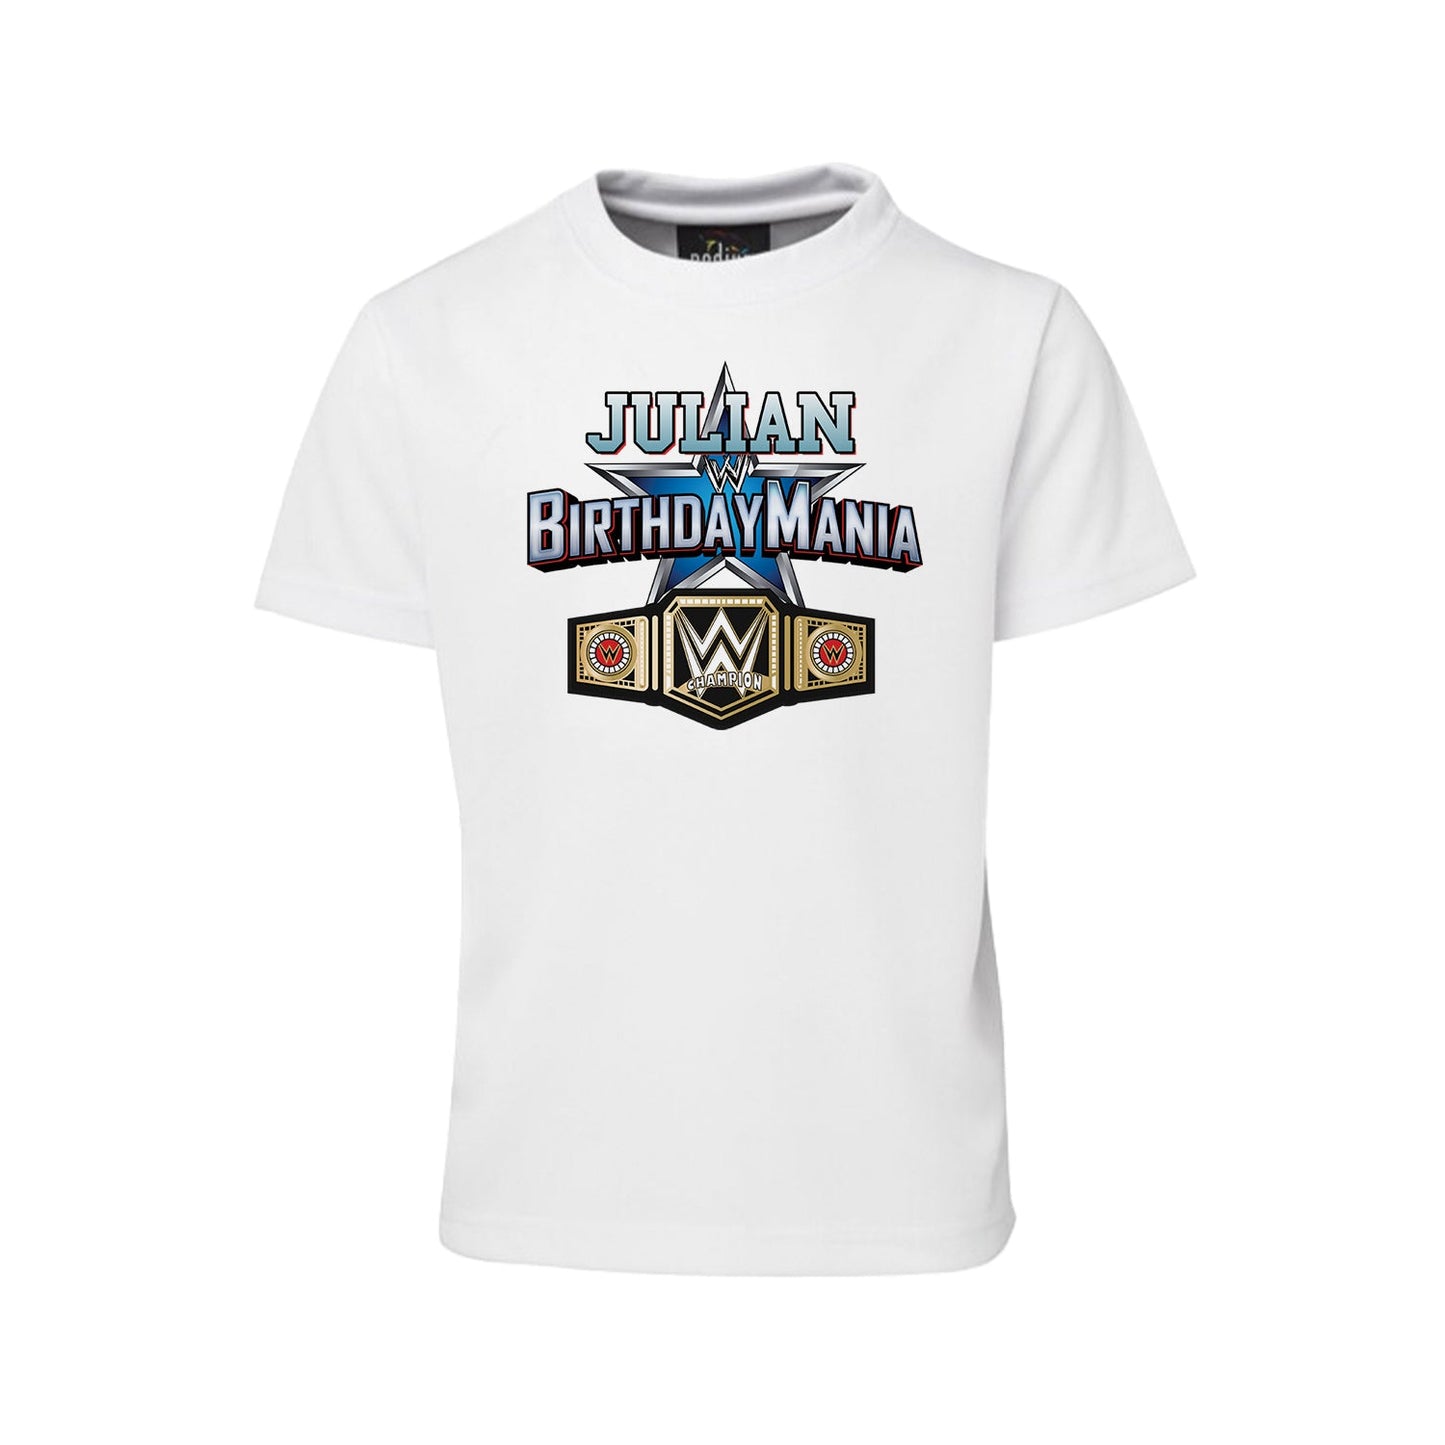 WWE themed sublimation t-shirt